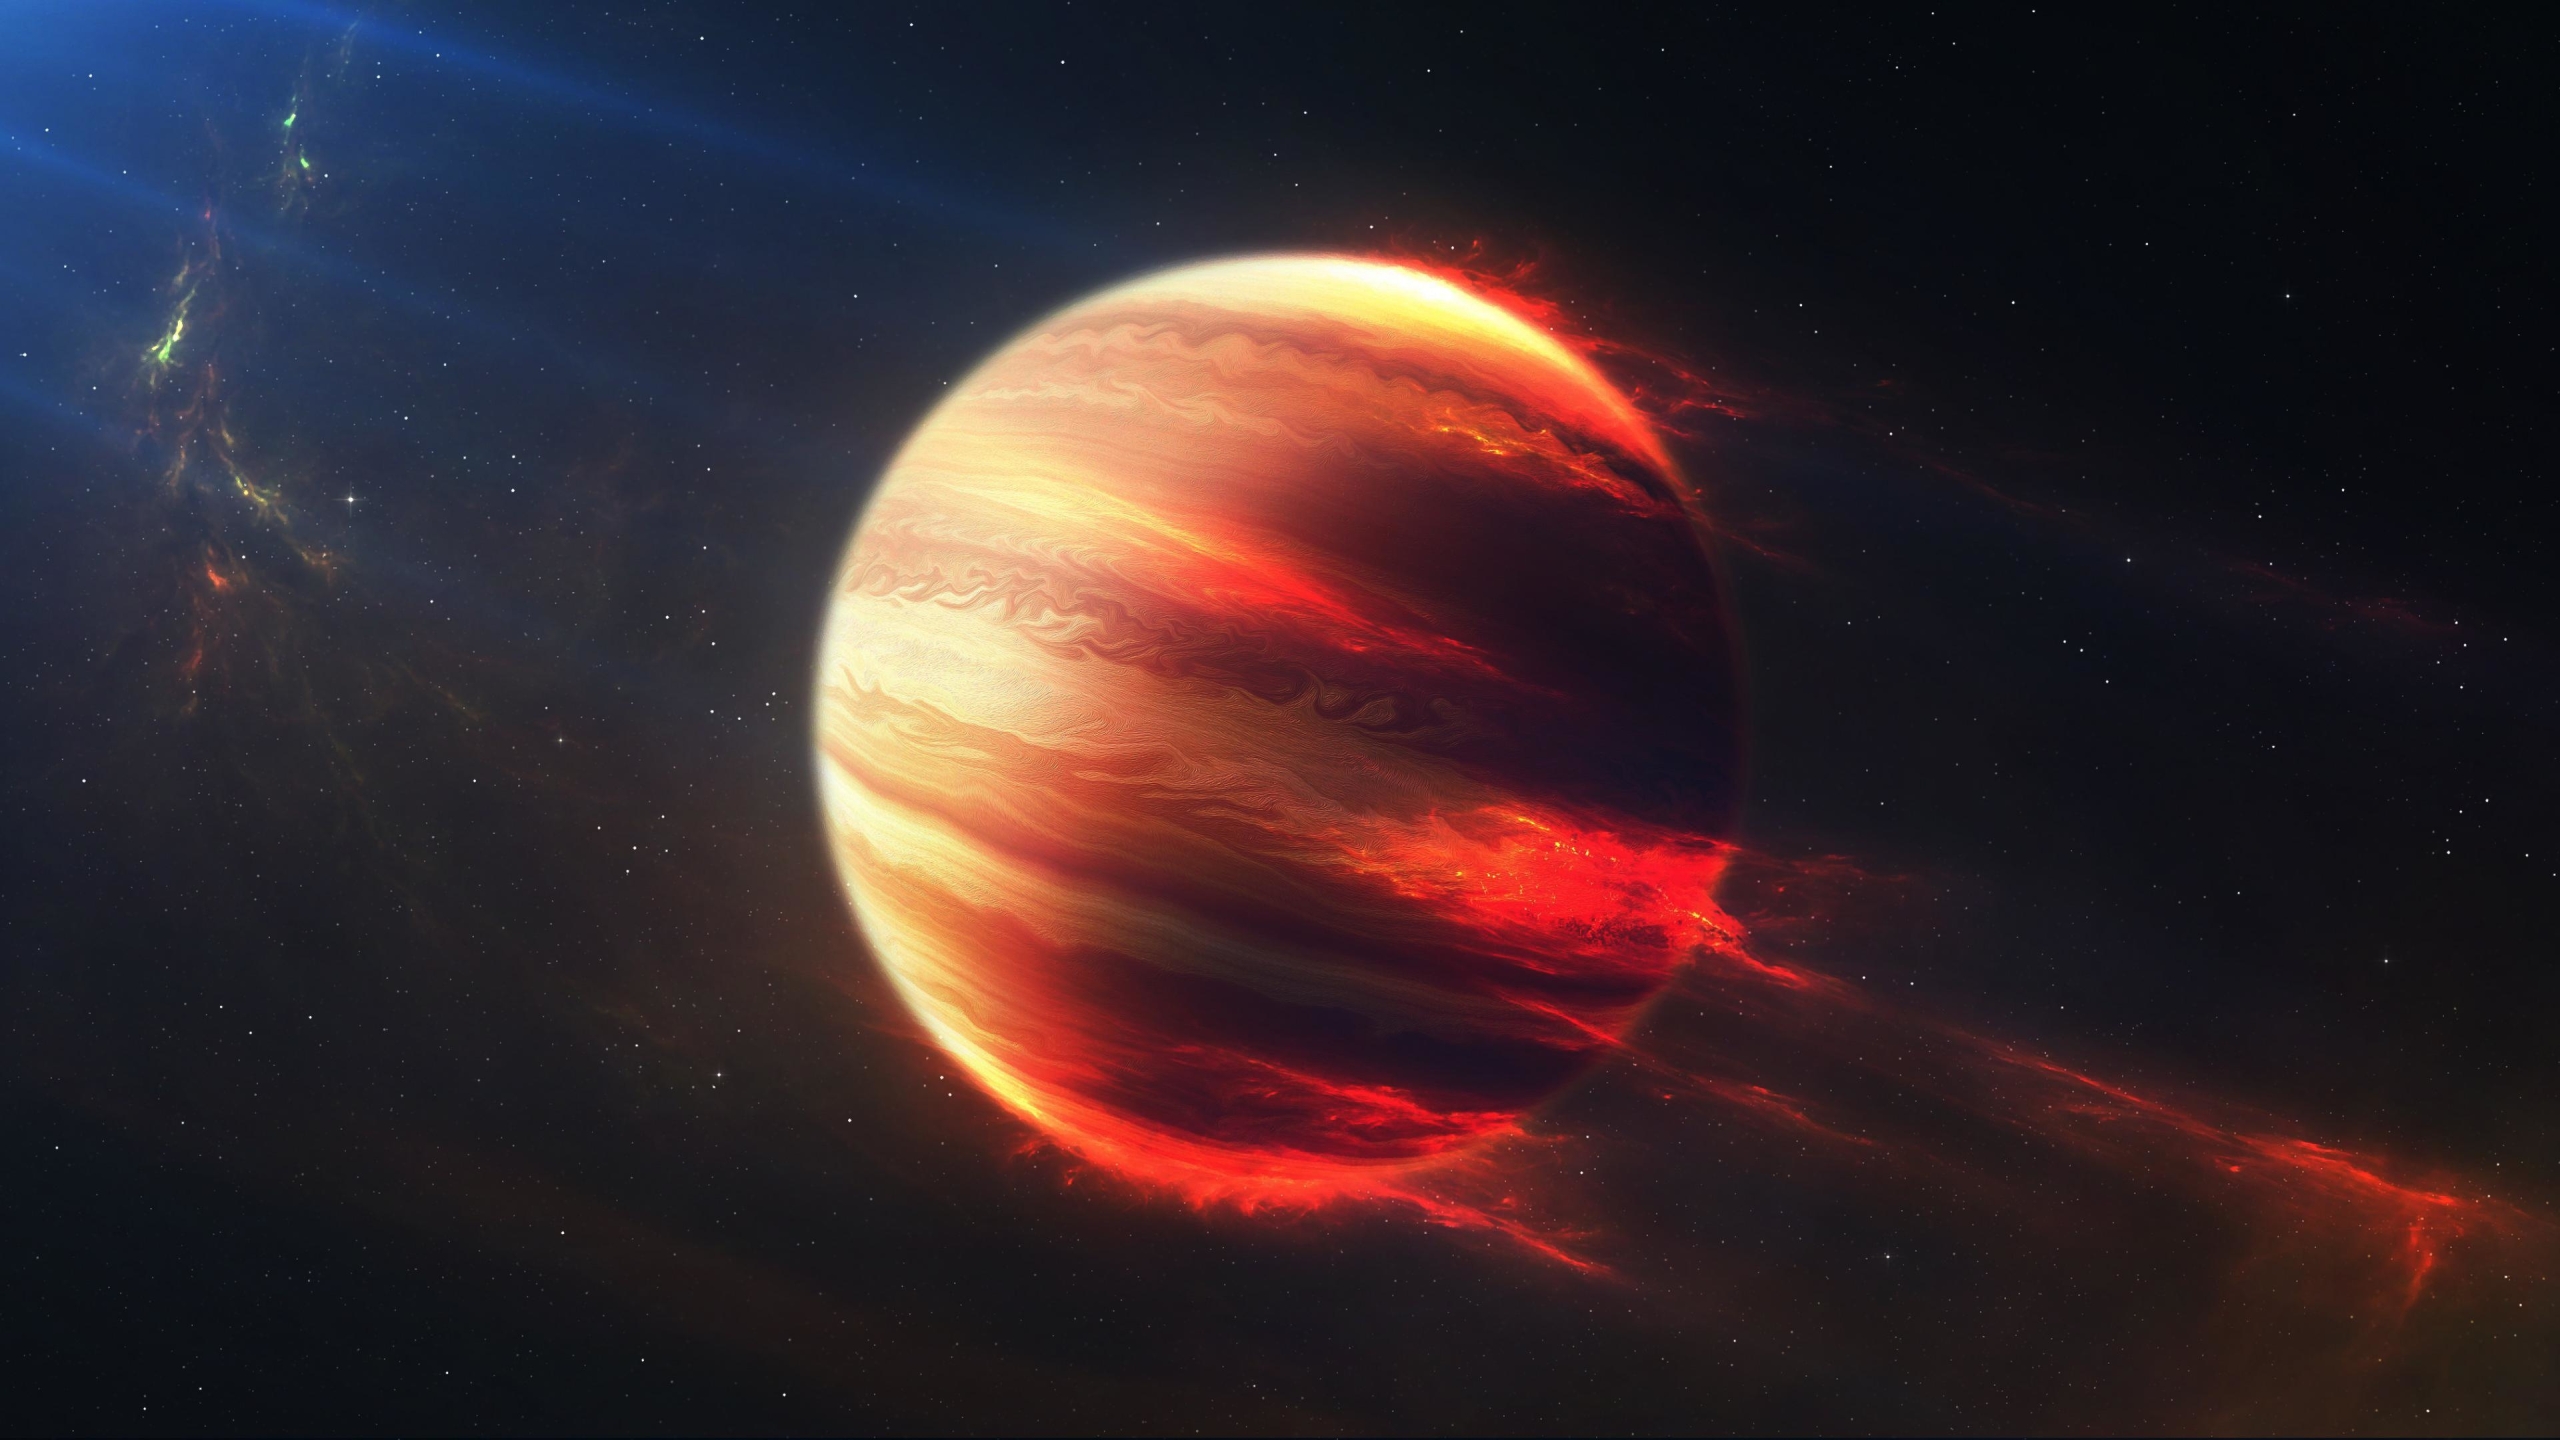 2560x1440 Jupiter 4k 1440p Resolution Wallpaper Hd Space 4k Wallpapers Images Photos And Background